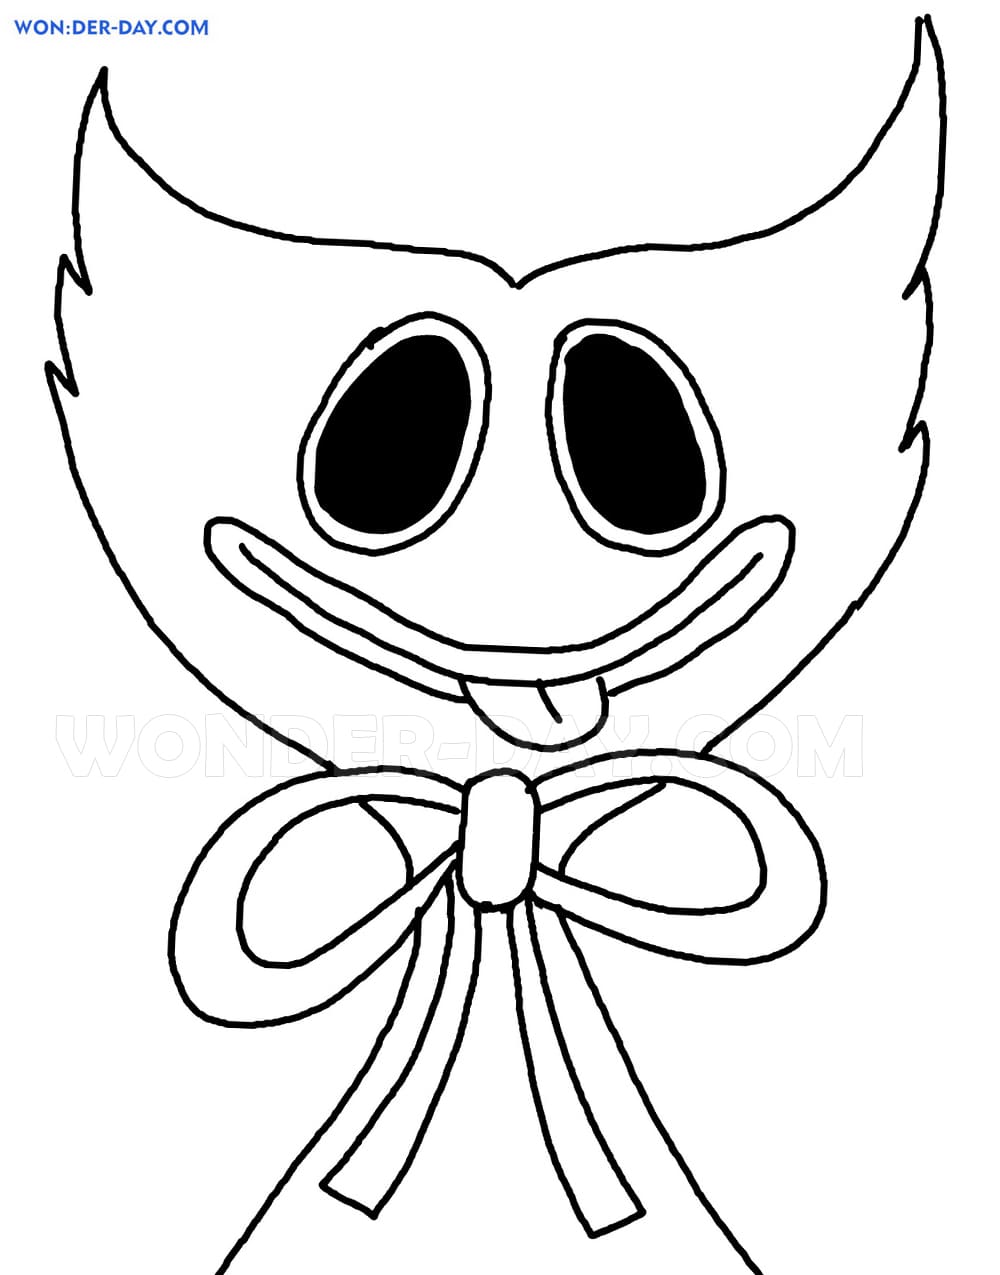 Poppy Playtime Coloring Pages Free Coloring Pages